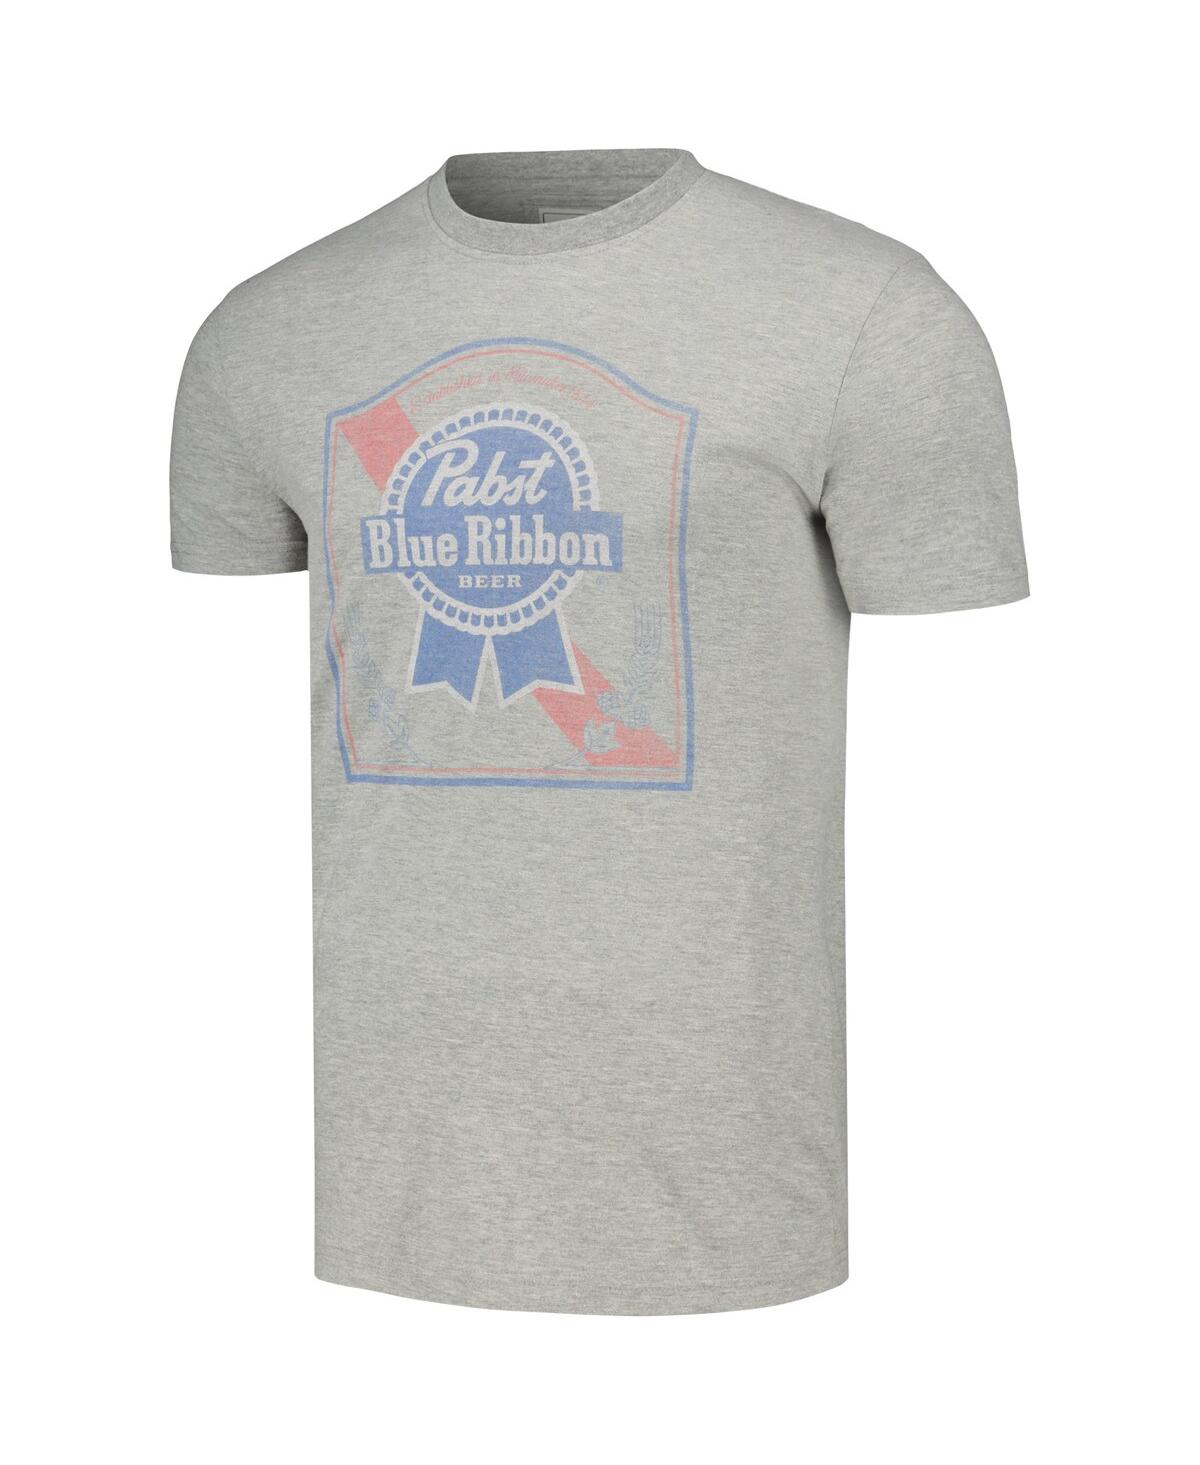 Shop American Needle Men's  Heather Gray Distressed Pabst Blue Ribbon Vintage-like Fade T-shirt